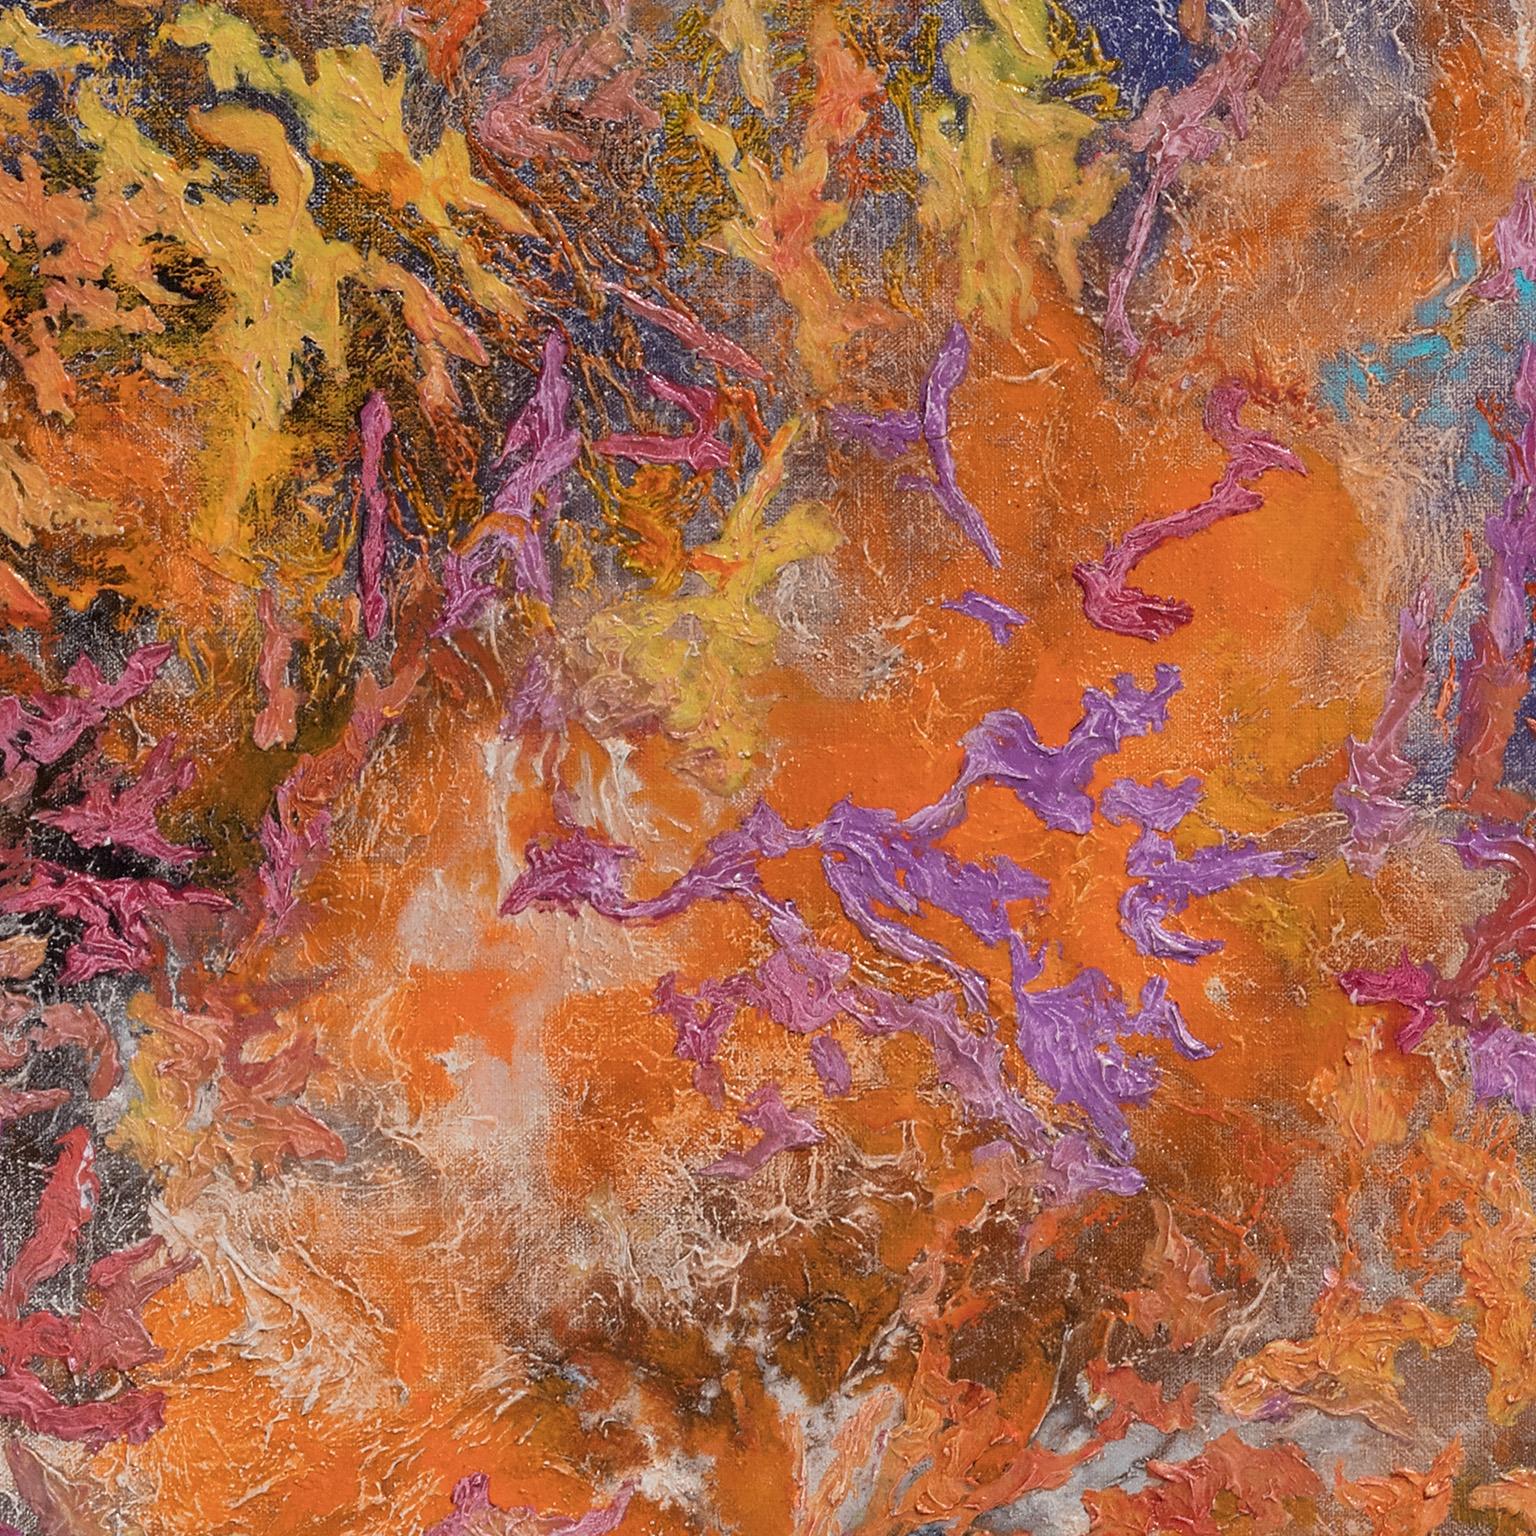 Battle of Colors - Abstract Expressionist Painting, Orange, Turquoise, Purple For Sale 2